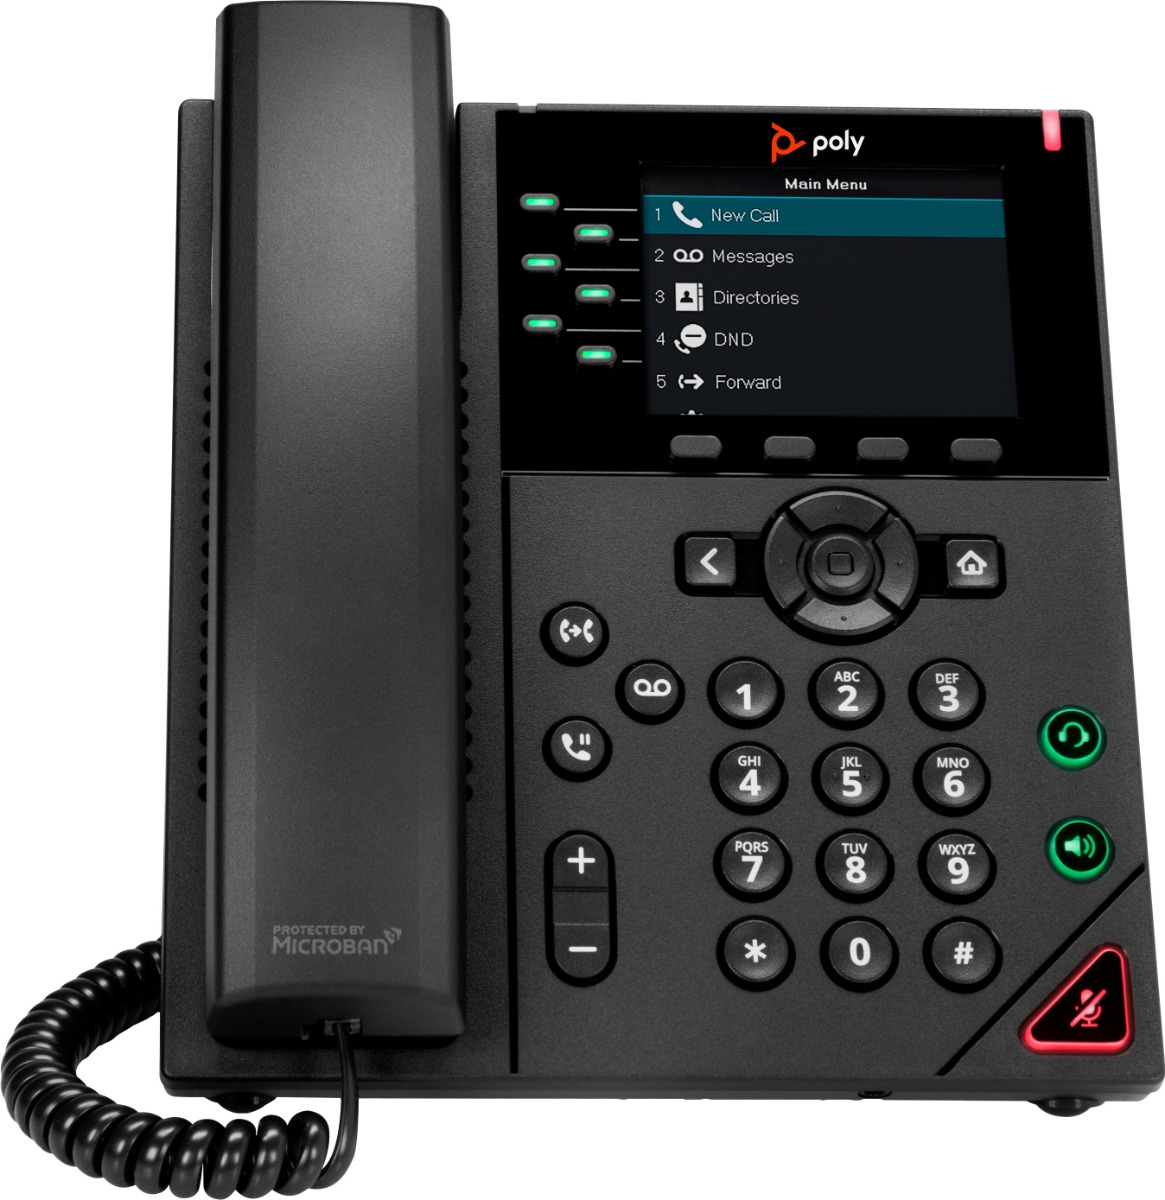 Is the Polycom VVX 350 compatible with the Poly VVX D60 Wireless Handset?